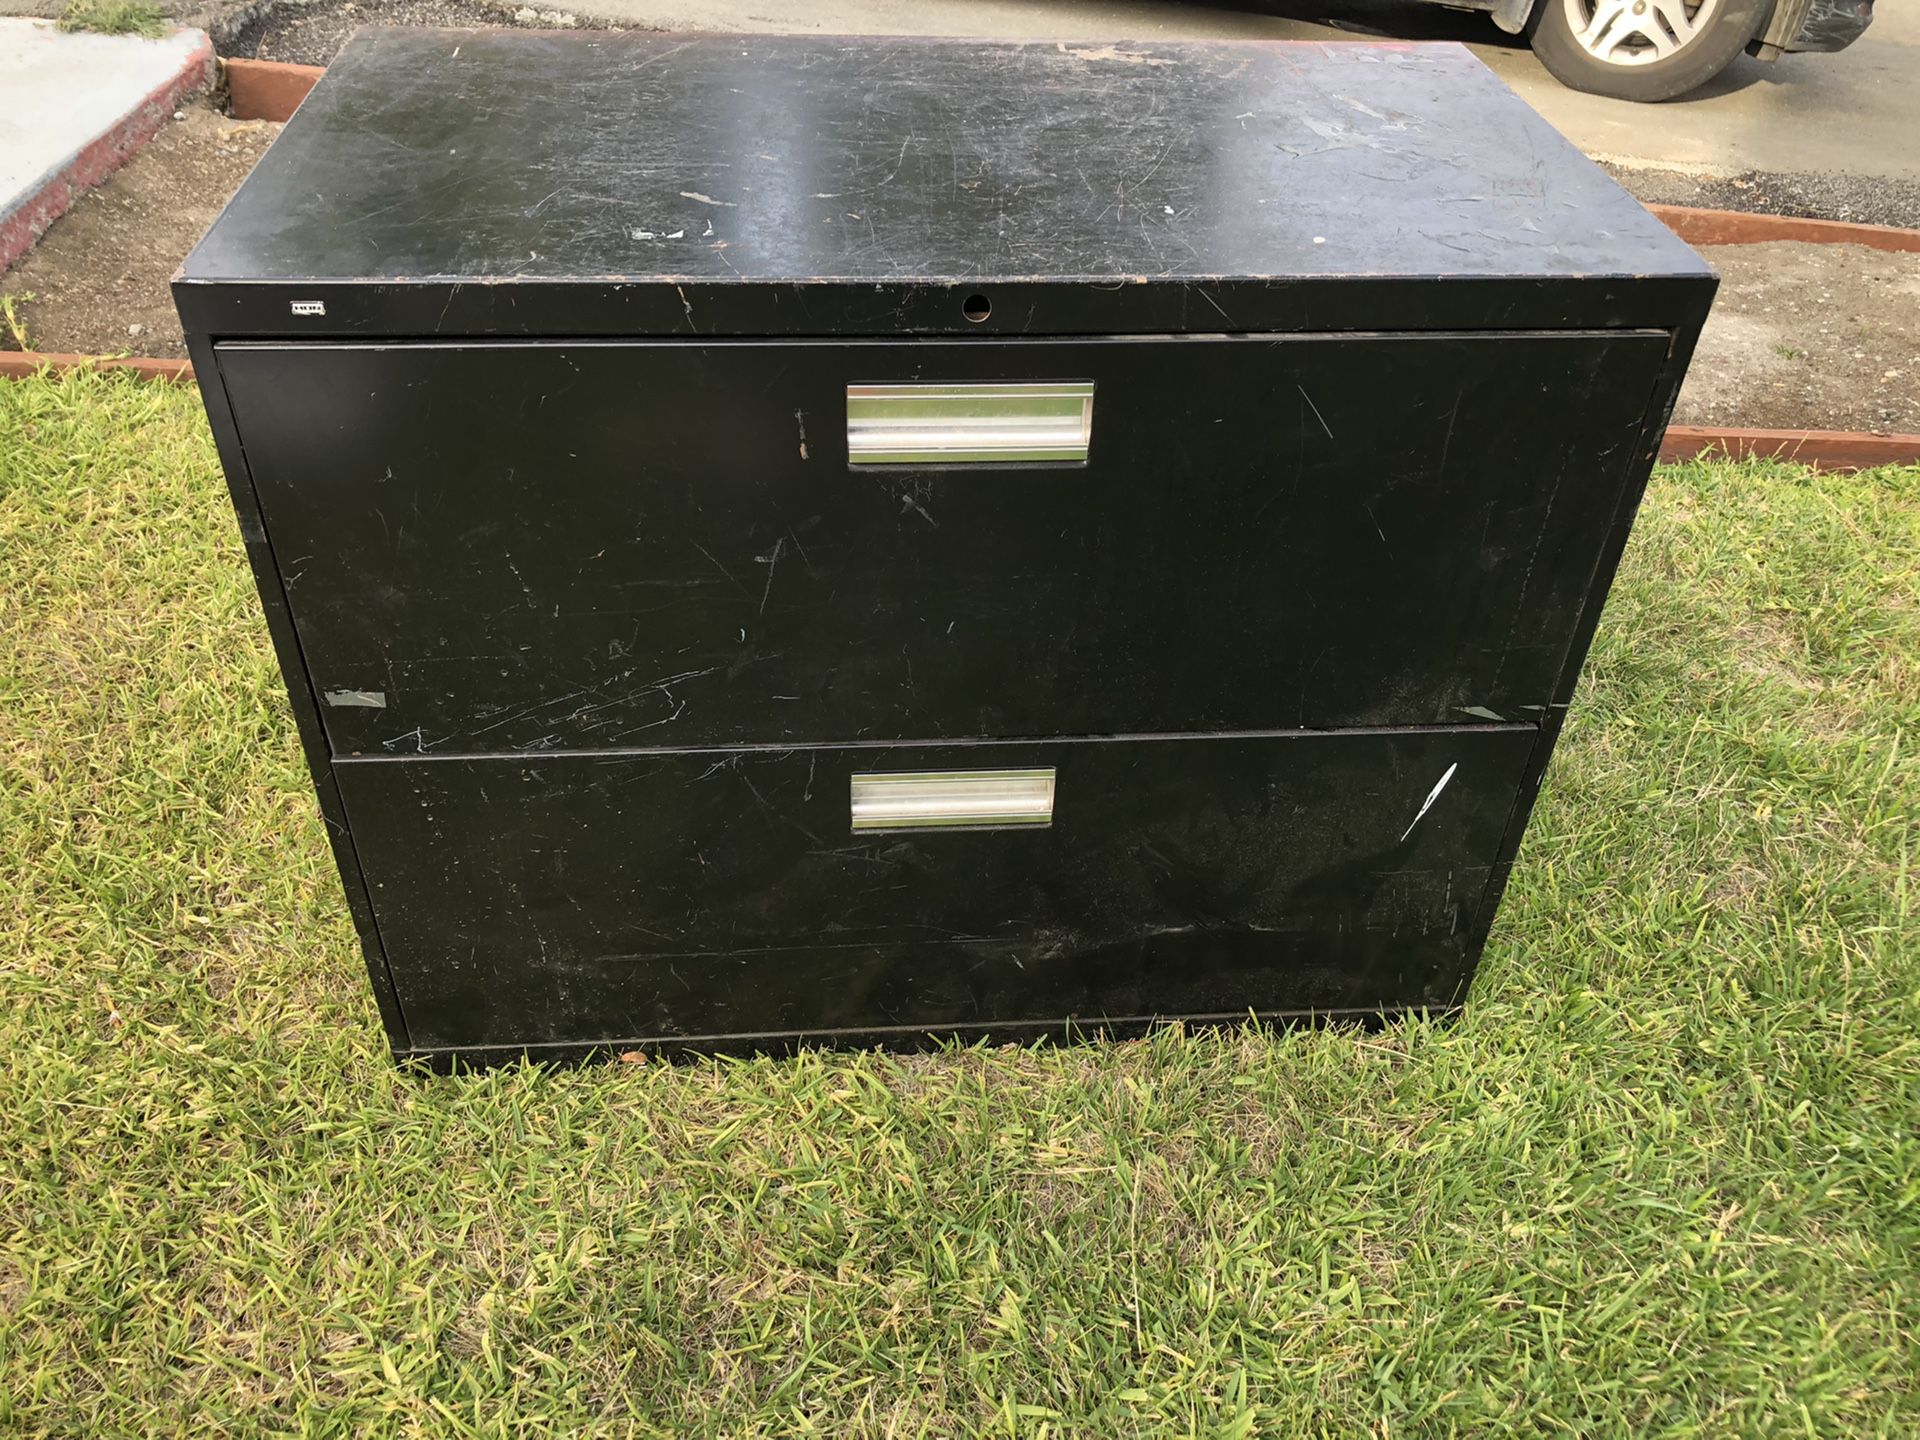 Free hon file cabinet. All metal